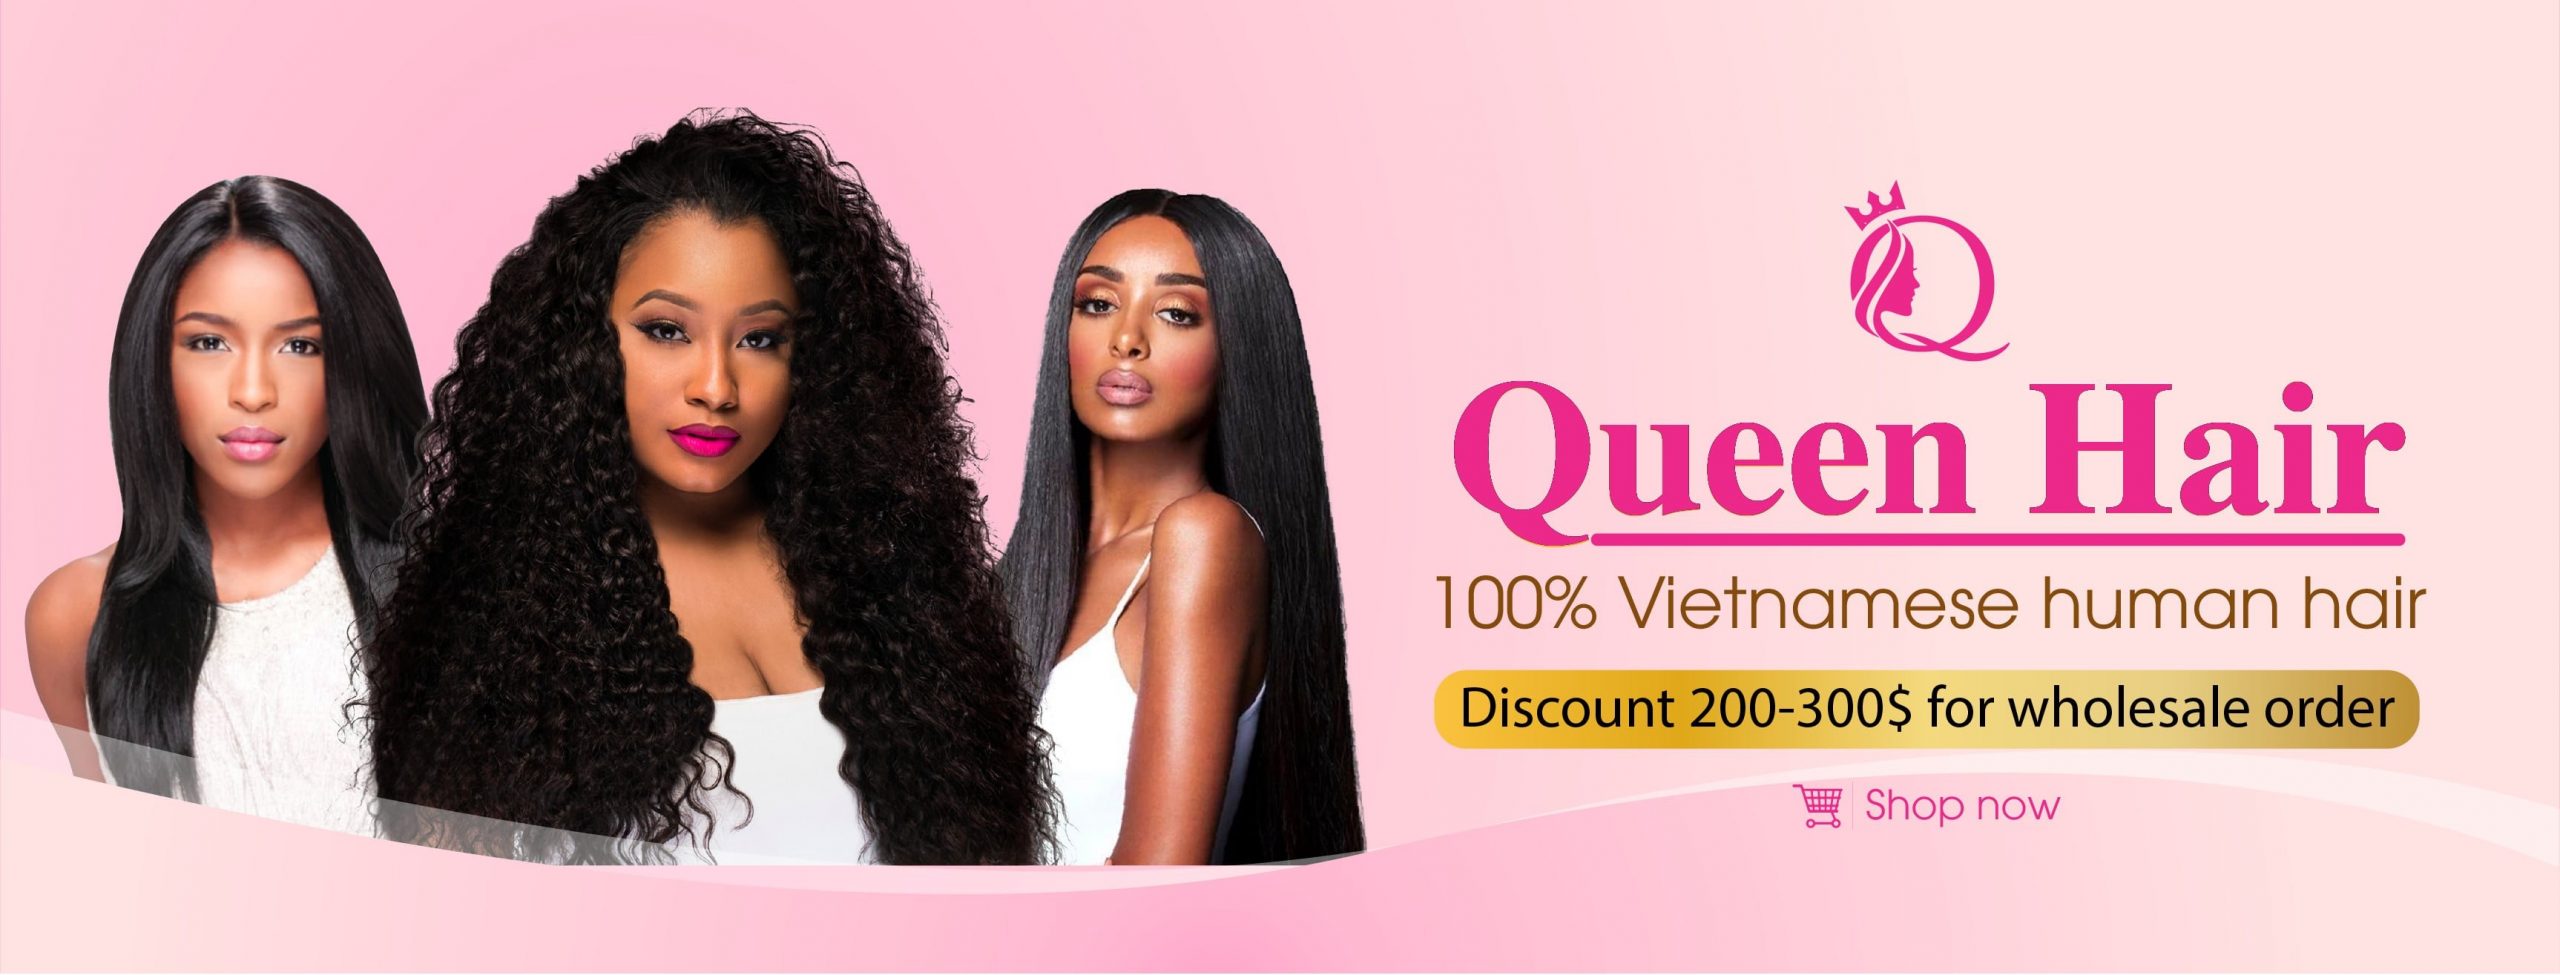 how-to-start-wholesale-nigerian-hair-business-with-100k-200k-naira9